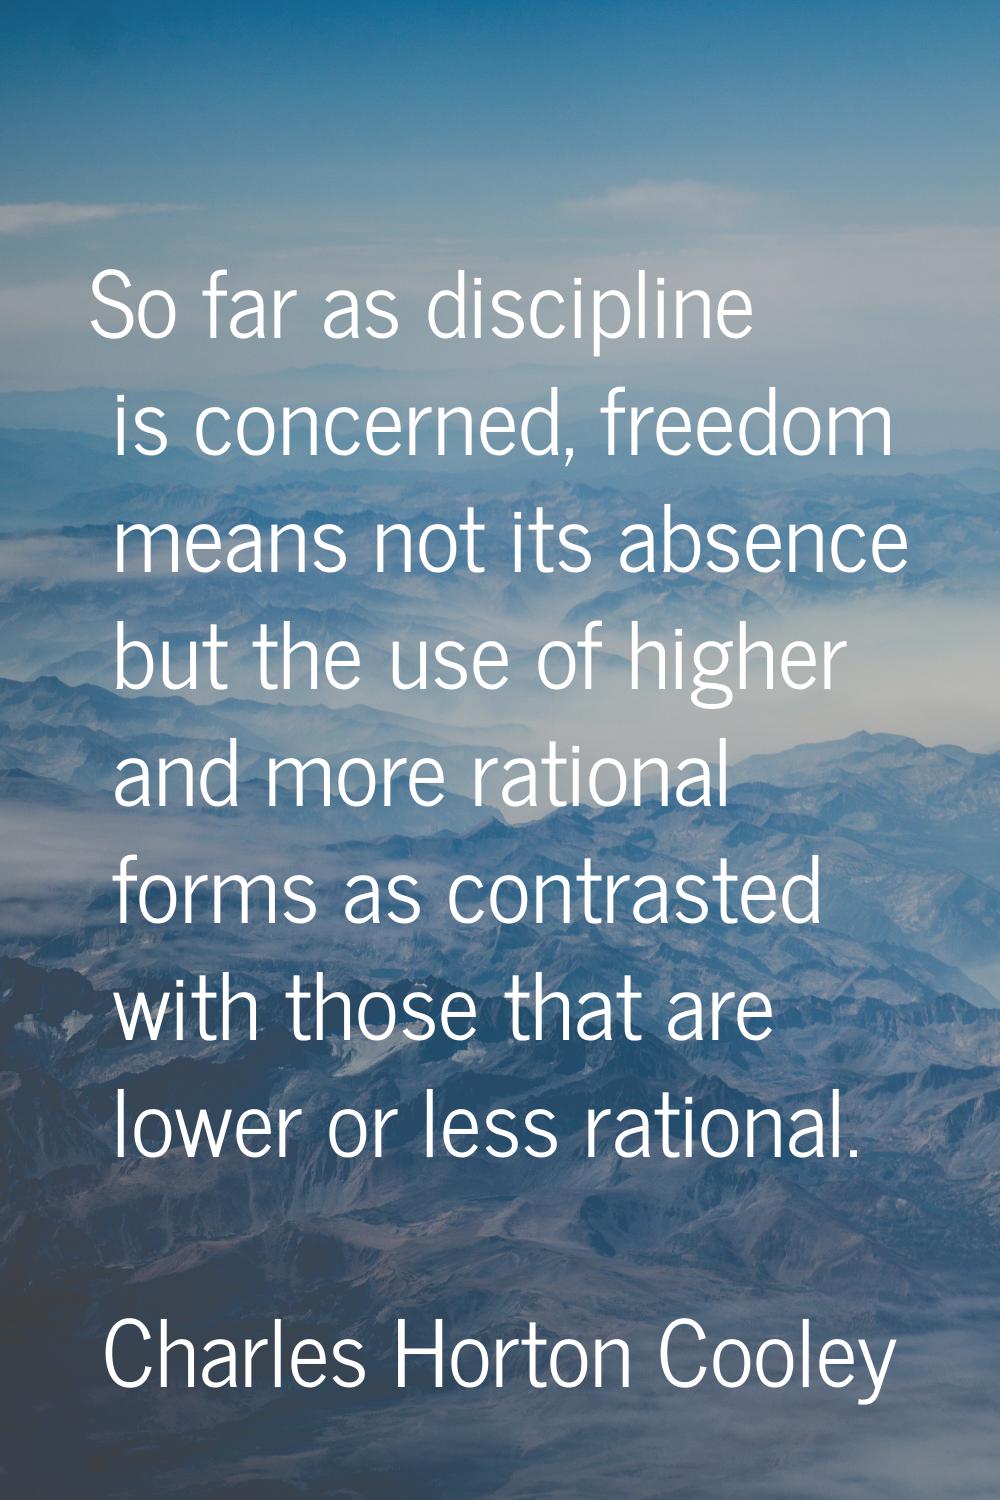 So far as discipline is concerned, freedom means not its absence but the use of higher and more rat